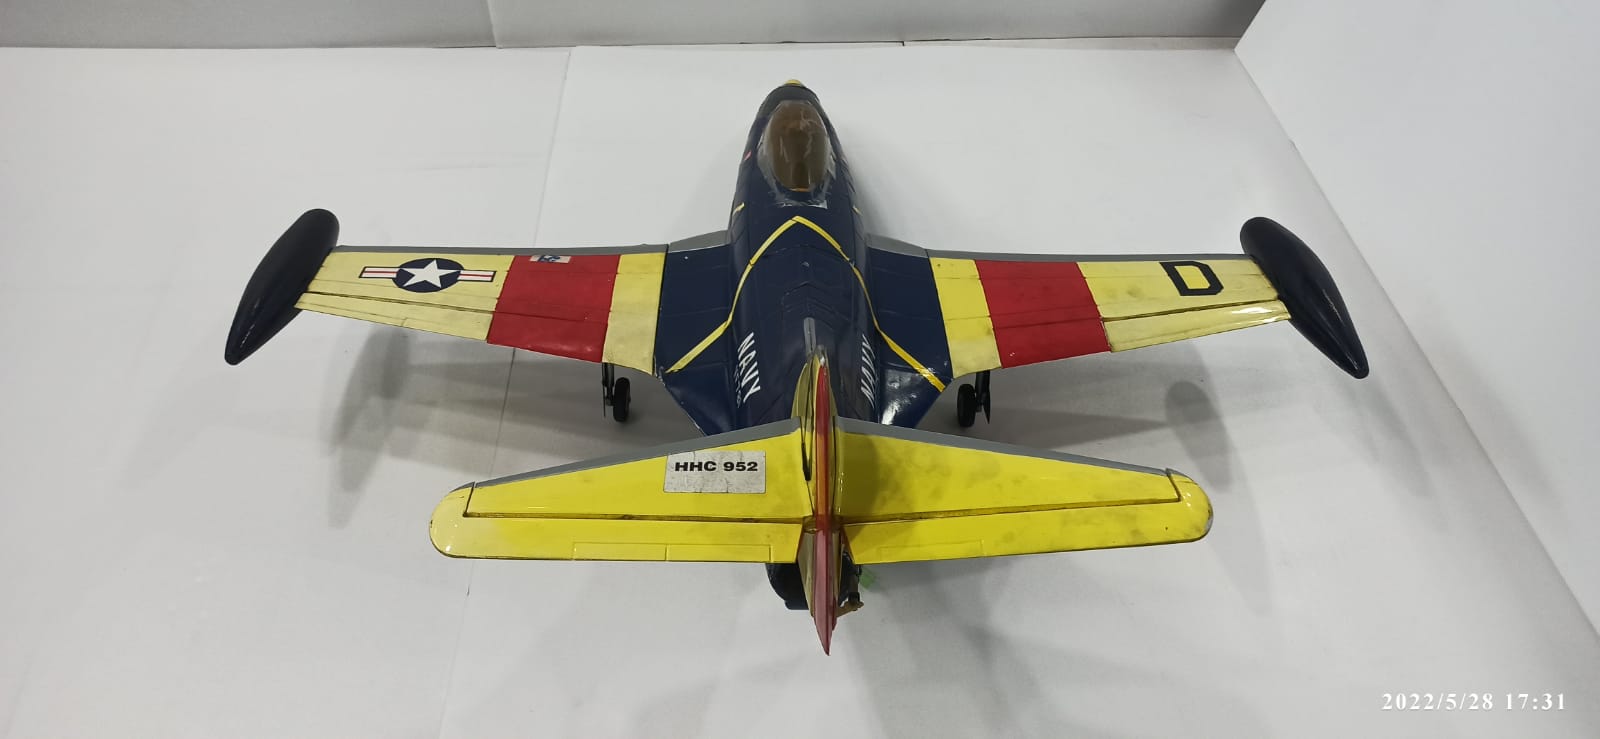 NAVY PHANTHAM-RTF-SMALL WITH DUCTED MOTOR RC PLANE (QUALITY PRE OWNED)